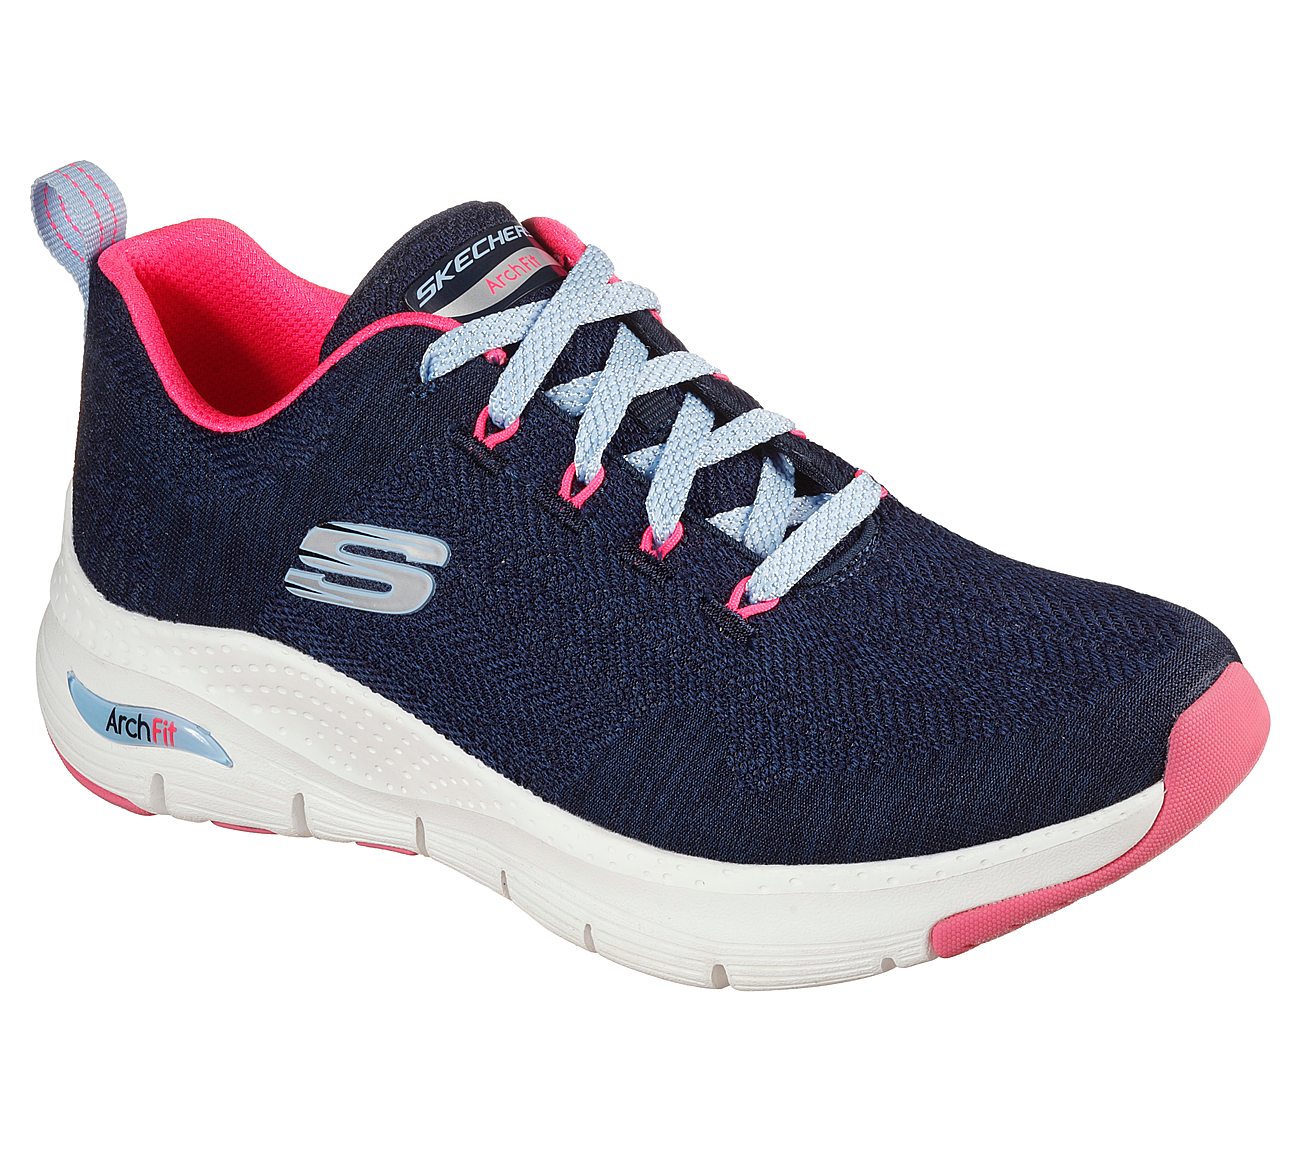 ARCH FIT-COMFY WAVE, NAVY/HOT PINK Footwear Right View